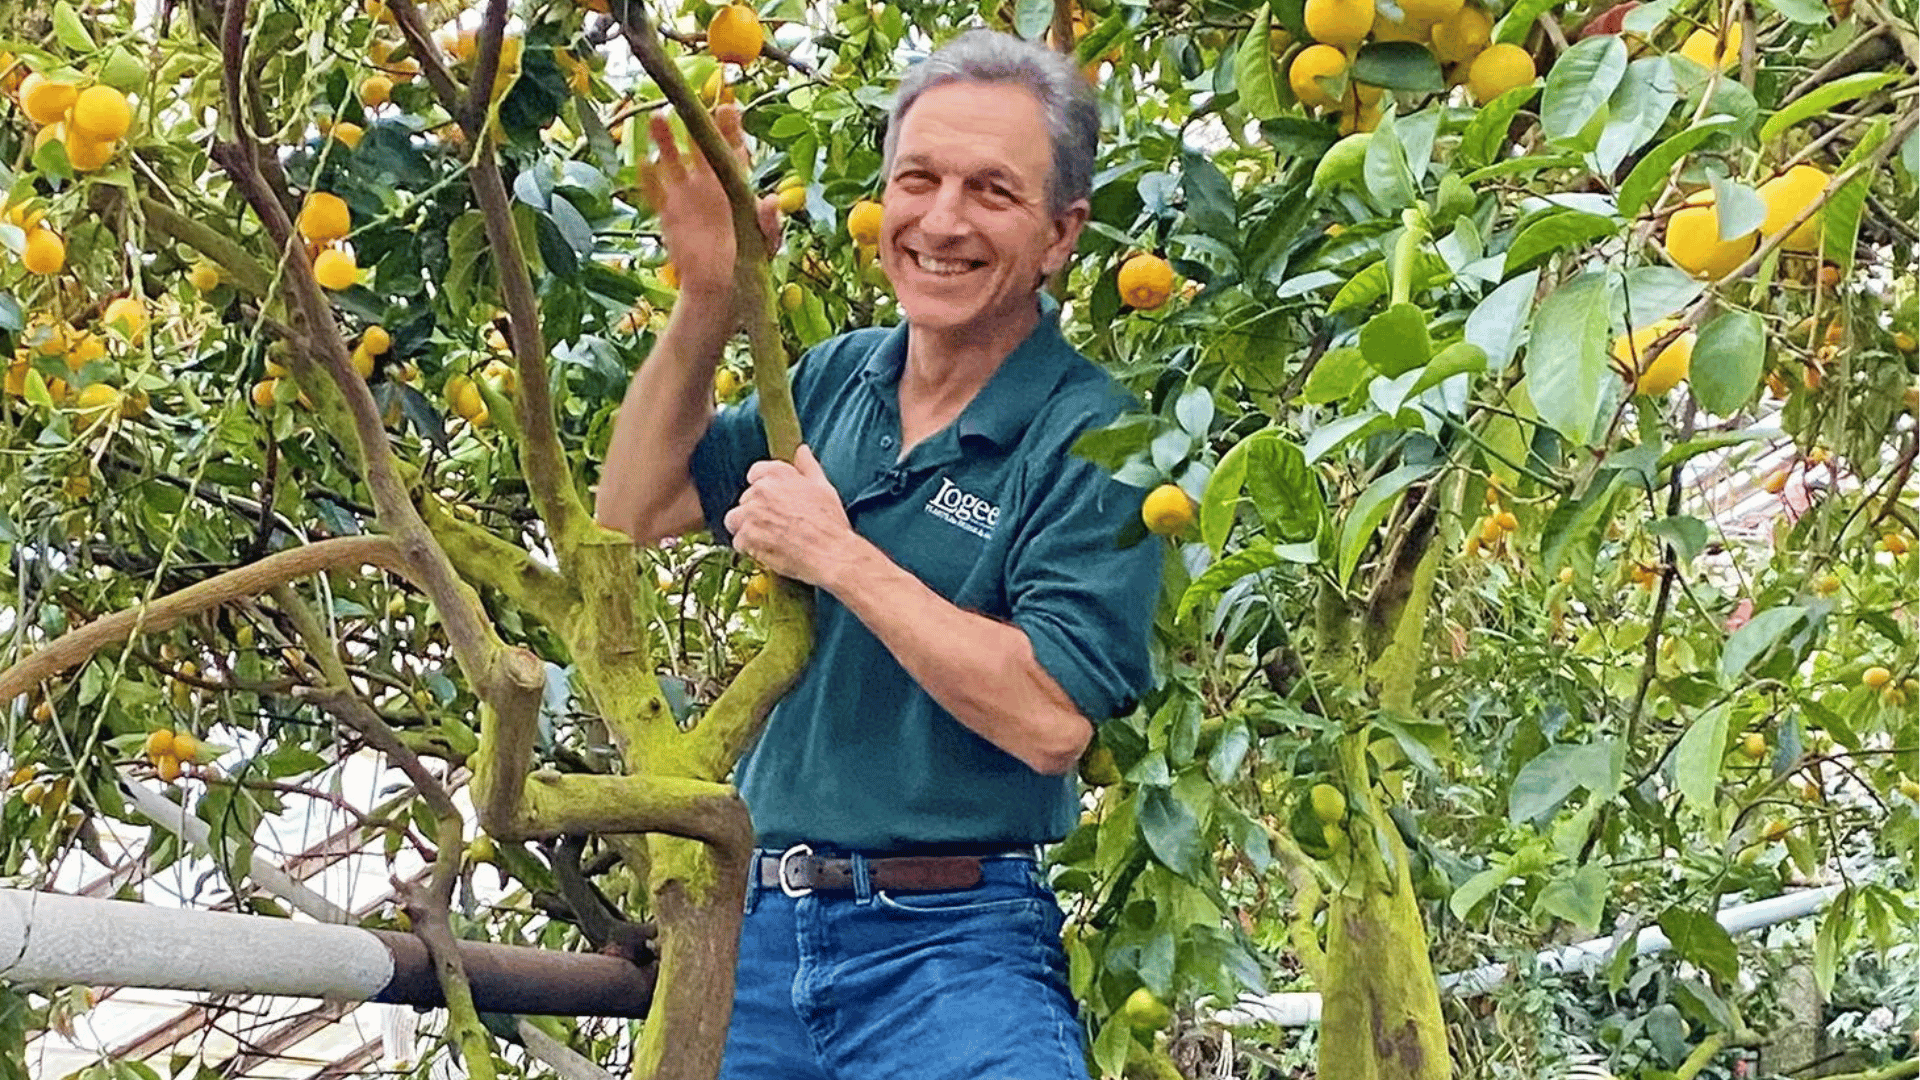 The century-old kumquat tree at Logee’s nursery is described as “sort of a matriarch” by the founder’s grandson, Byron Martin.Credit...Logee’s Greenhouses